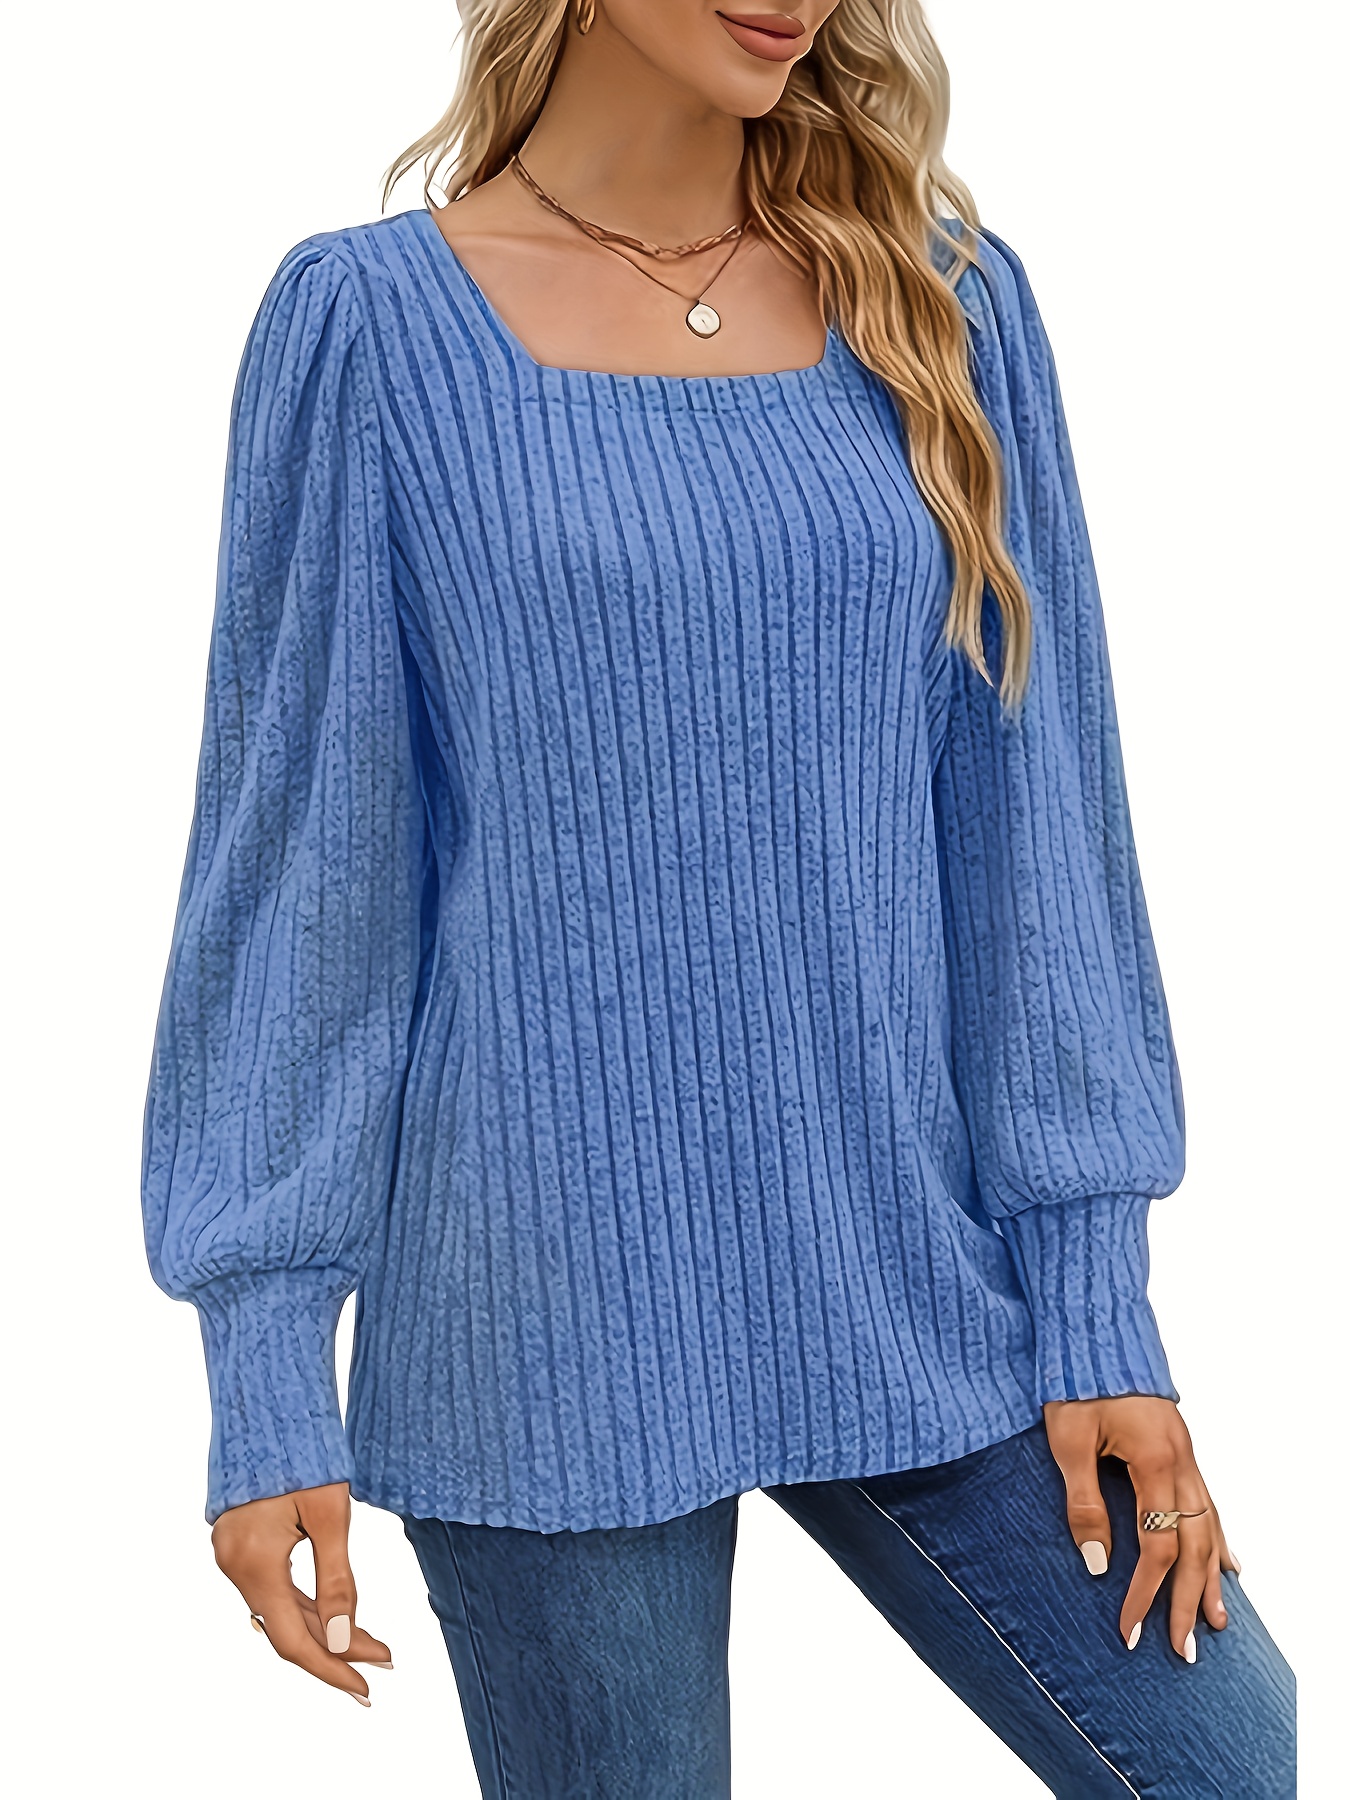 Finely ribbed square neckline sweater